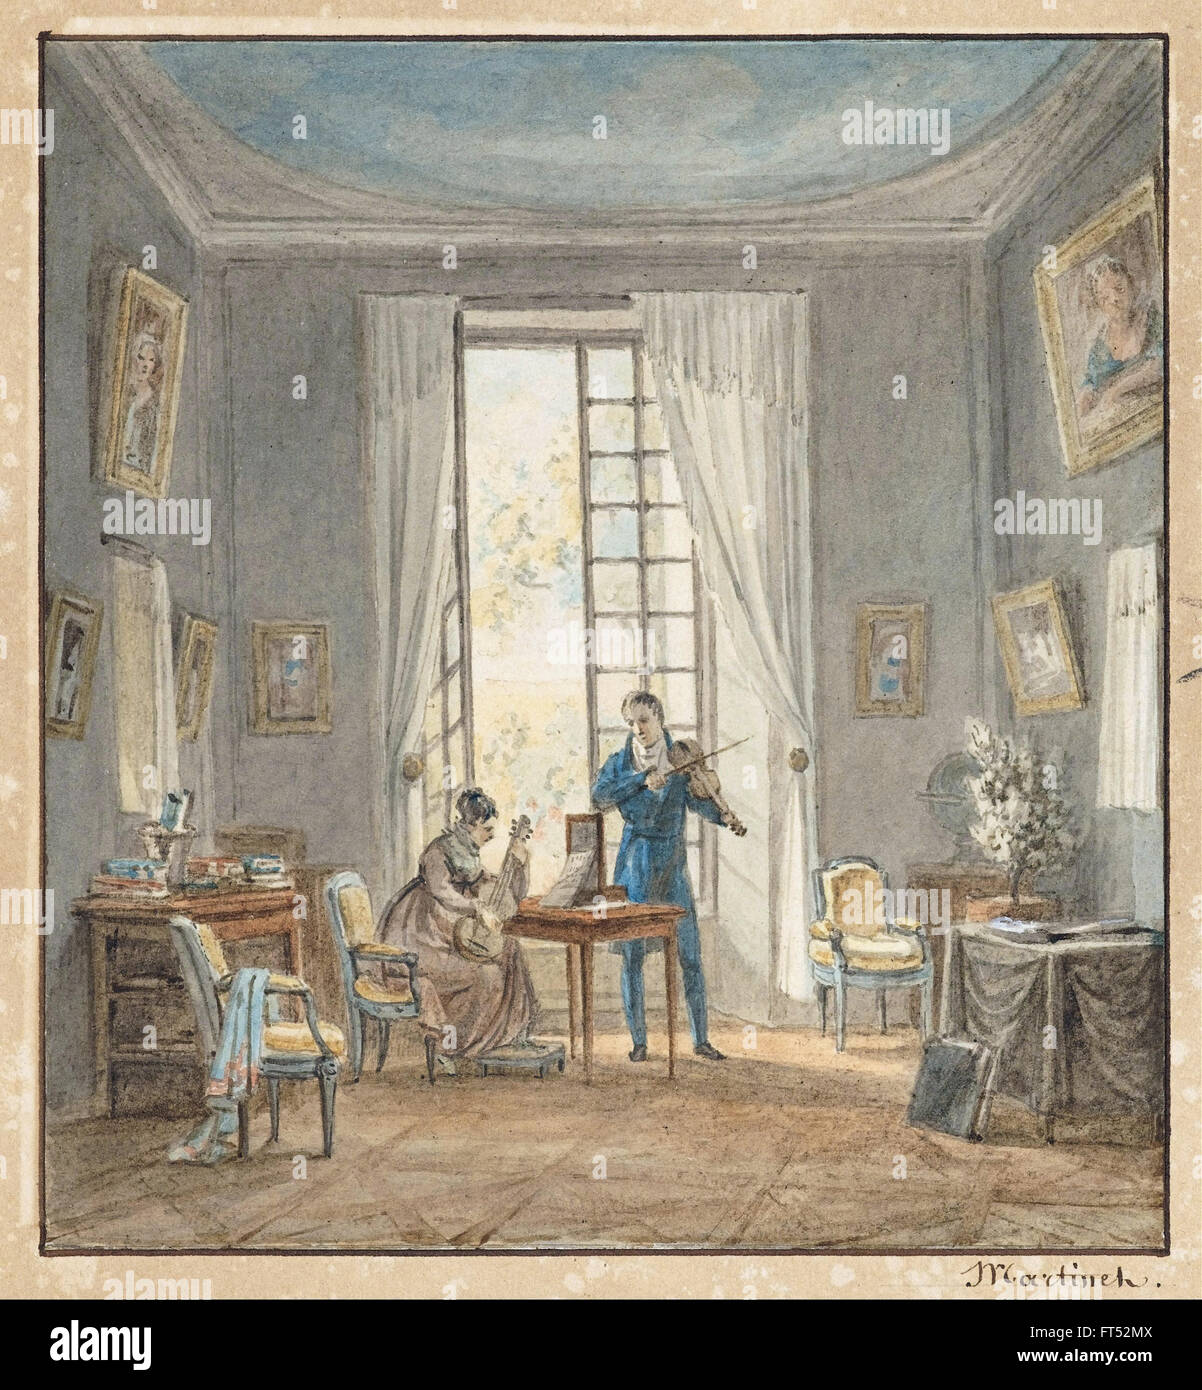 Achille-Louis Martinet - Salon Interior with Gabriel d'Arjuzon Playing the Violin - Cooper-Hewitt, National Design Museum Stock Photo